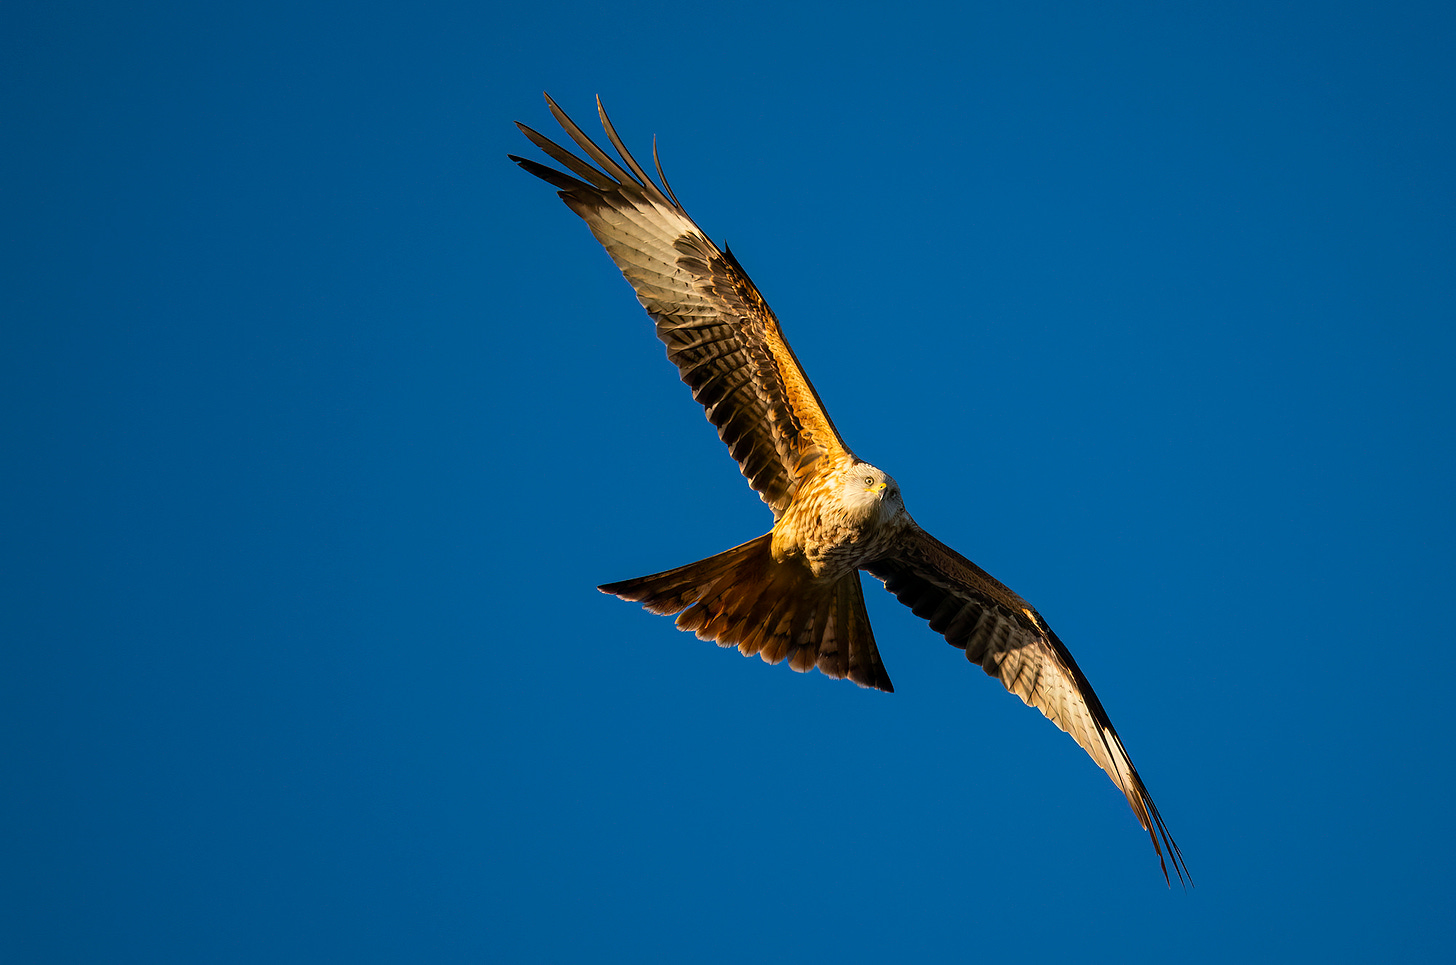 Photo of a red kite flying in blue sky